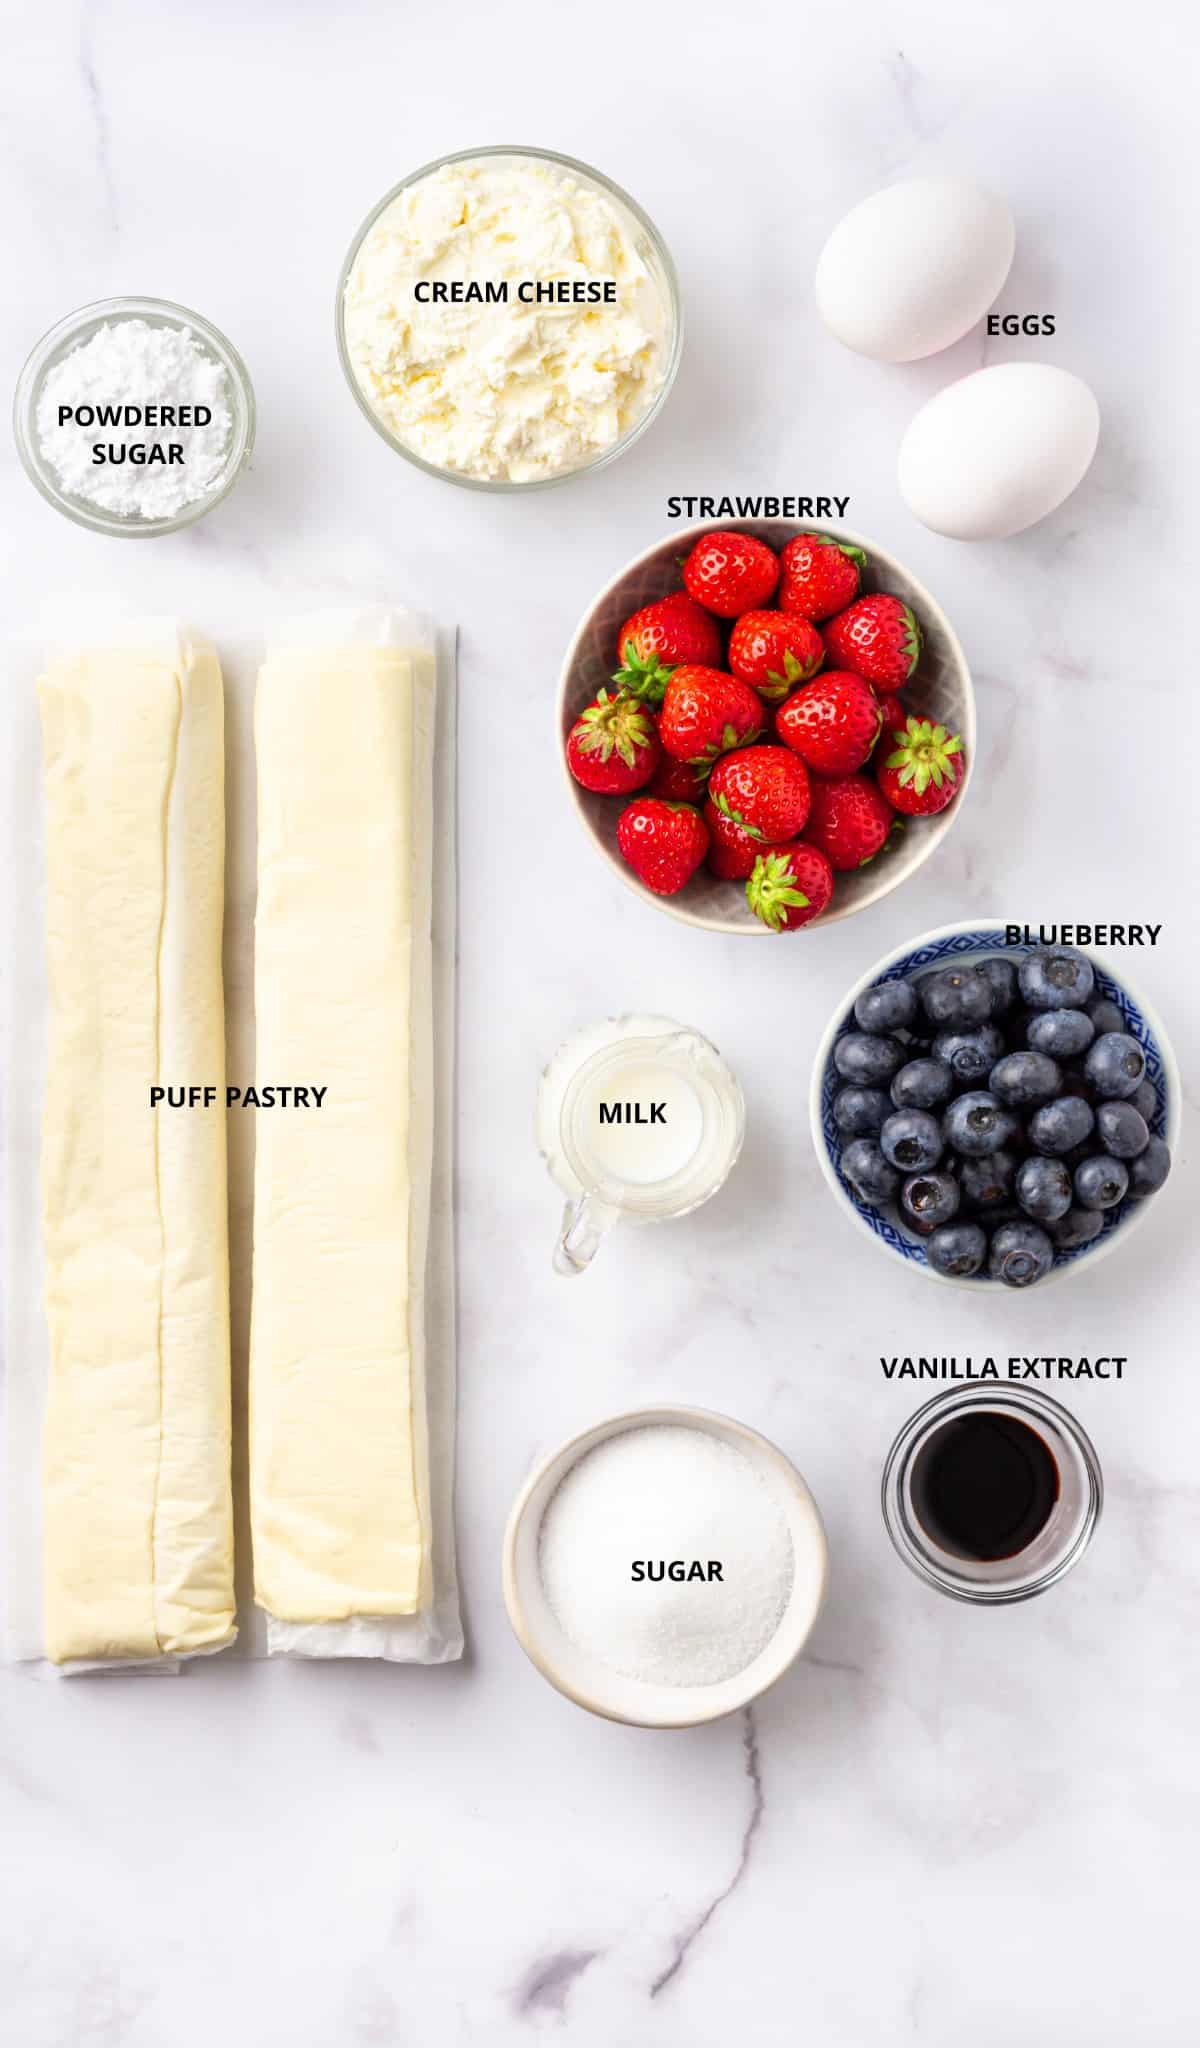 all of the ingredients for the cream cheese danish recipe on a white marble surface: cream cheese, powdered sugar, strawberries, eggs, puff pastry, milk, blueberries, vanilla extract, and sugar